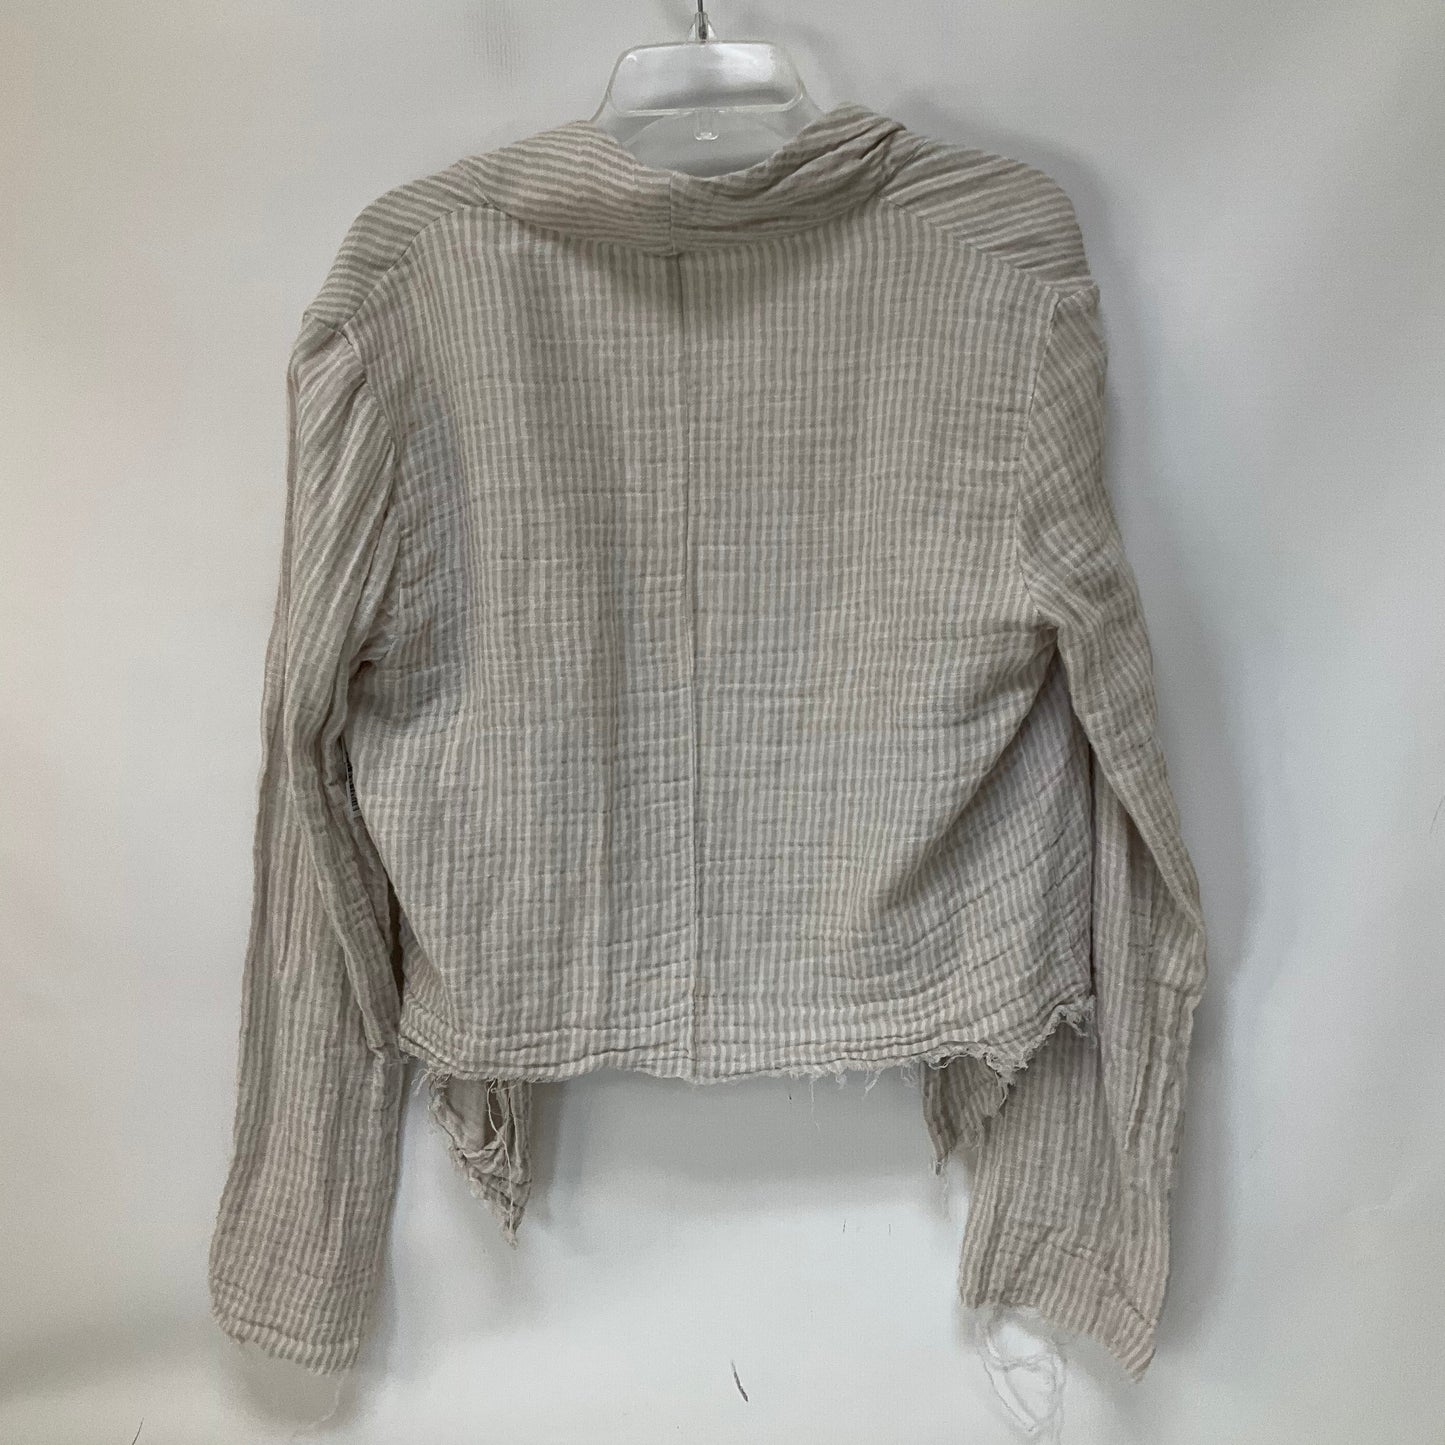 Striped Pattern Top Long Sleeve Free People, Size S